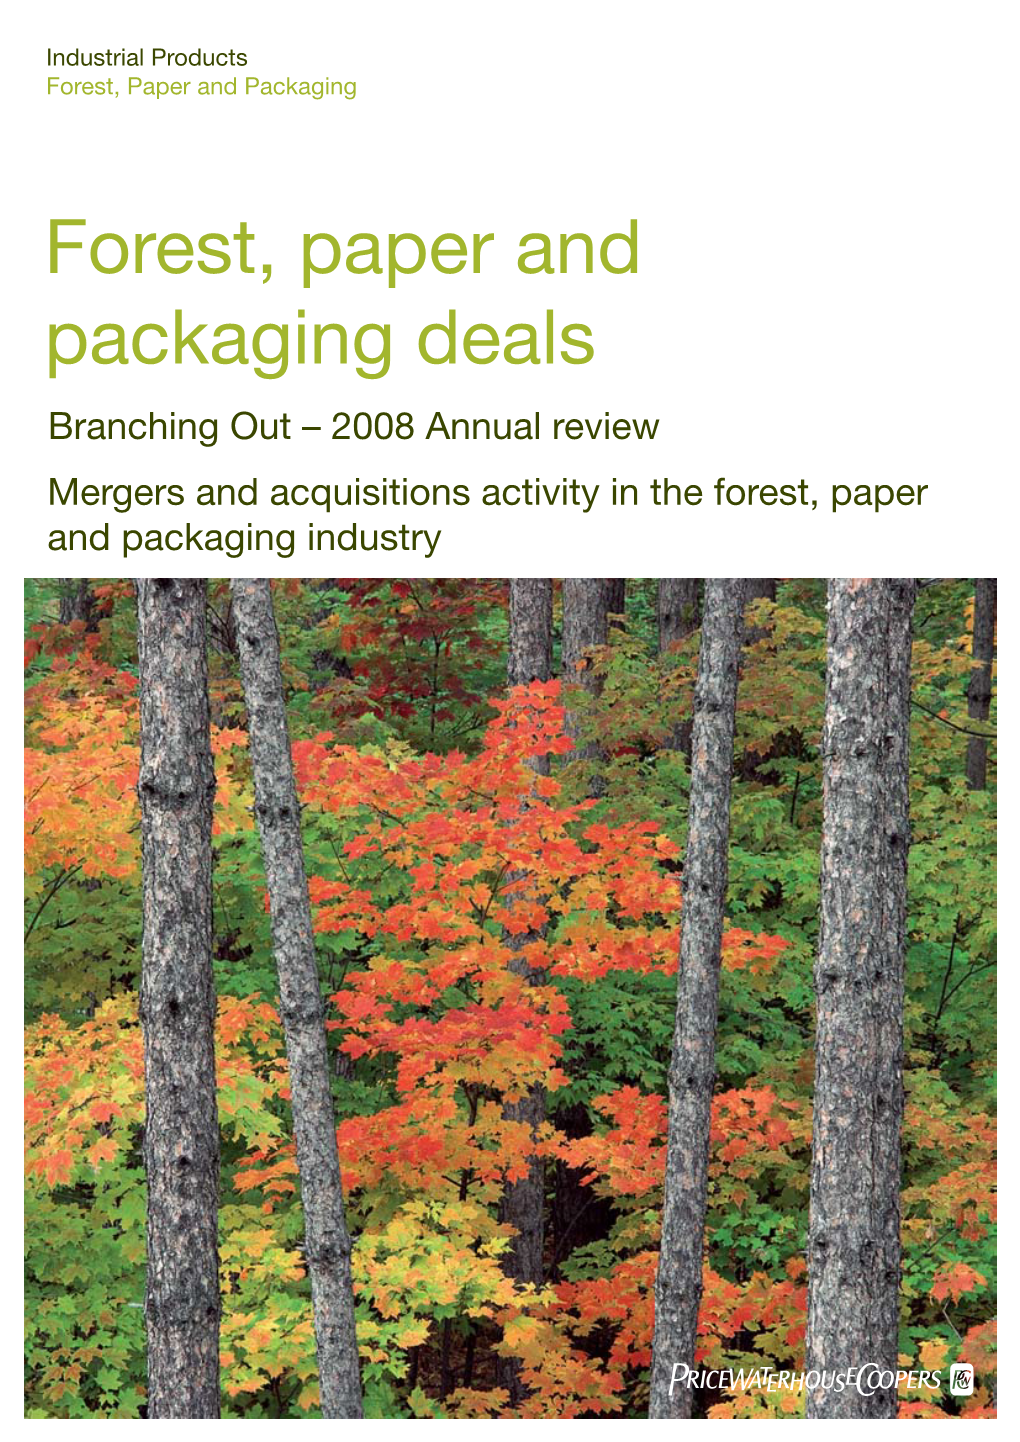 Forest, Paper and Packaging Deals Branching out – 2008 Annual Review Mergers and Acquisitions Activity in the Forest, Paper and Packaging Industry Contents